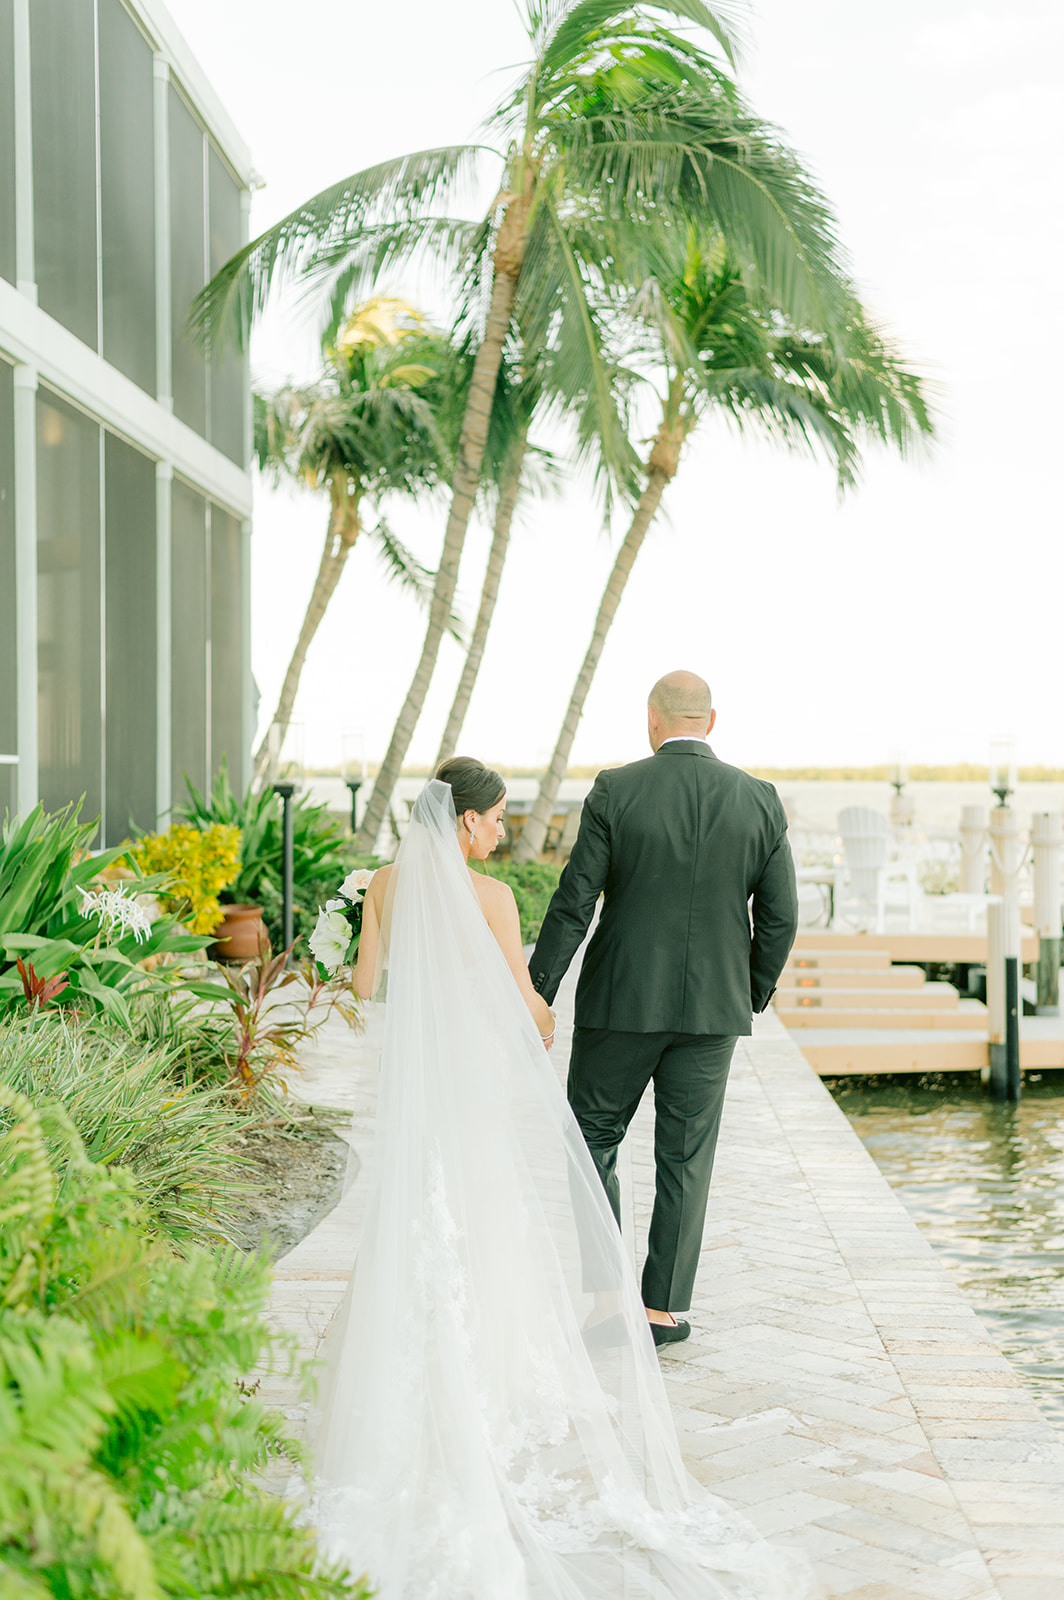 Fine Art Wedding Photography in Naples Florida - A Beautiful Story in Images
